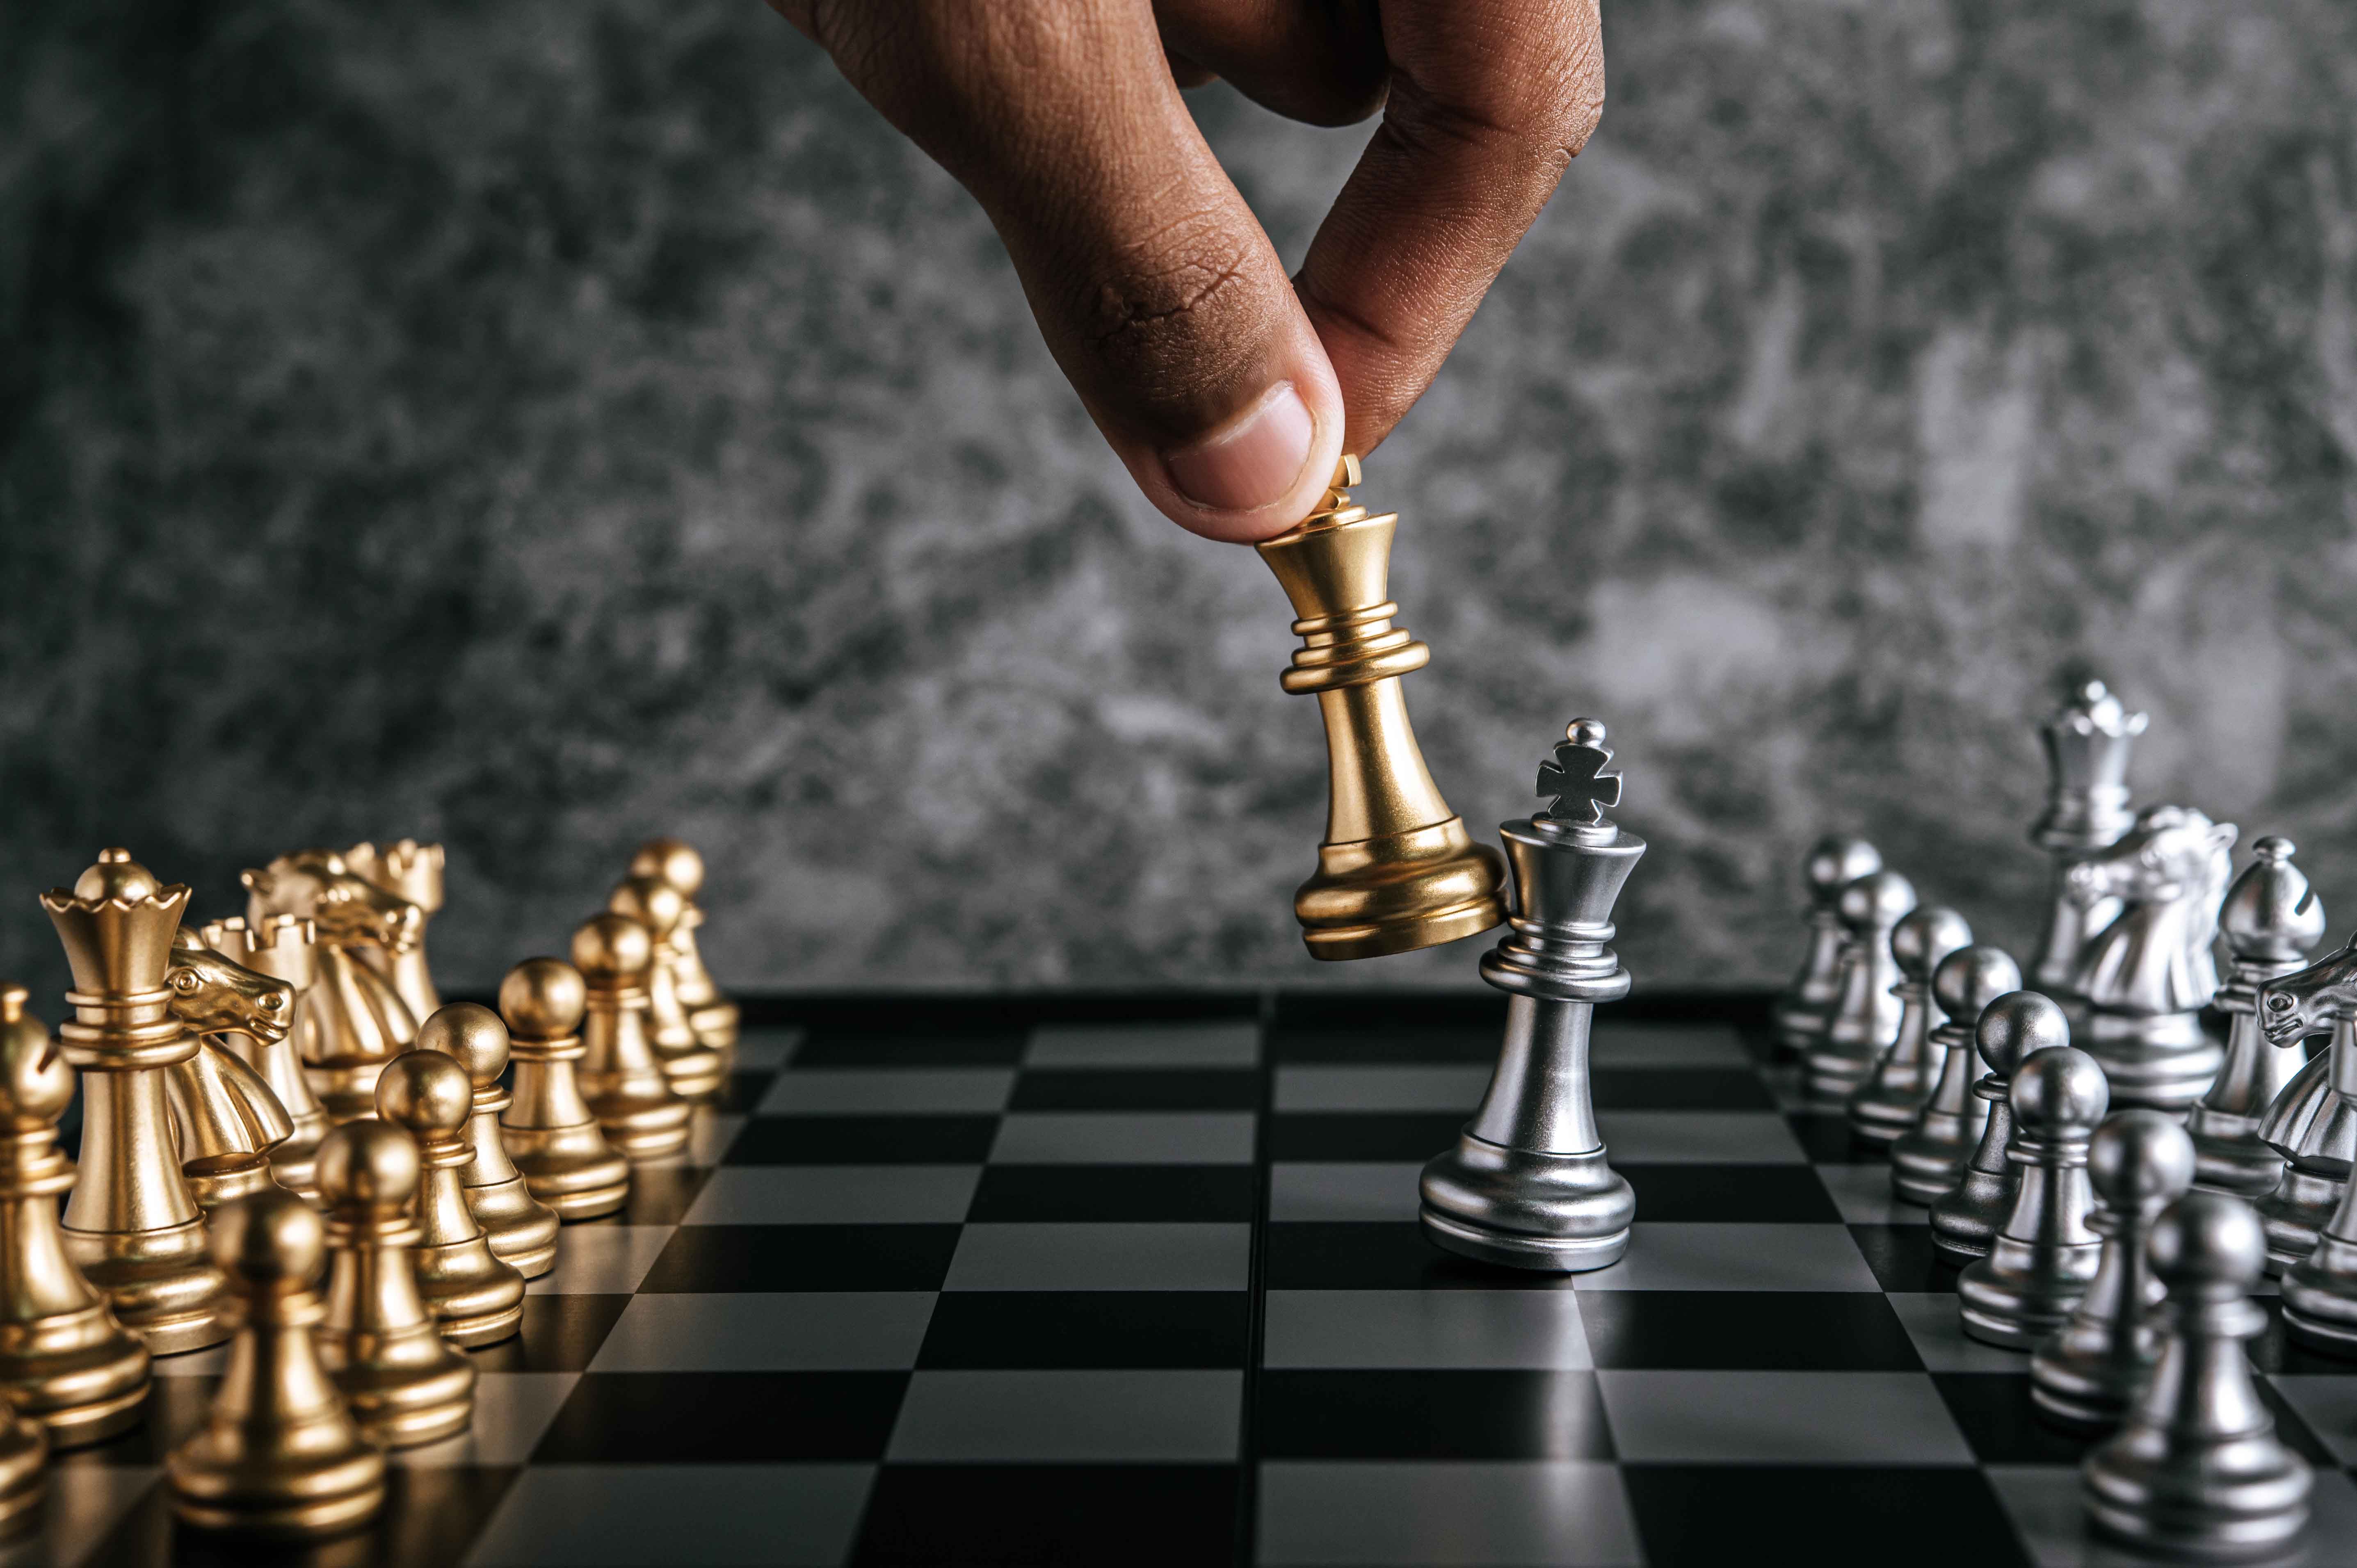 hand-of-man-playing-chess-for-business-planning-and-comparison-of-metaphor-selective-focus.jpg